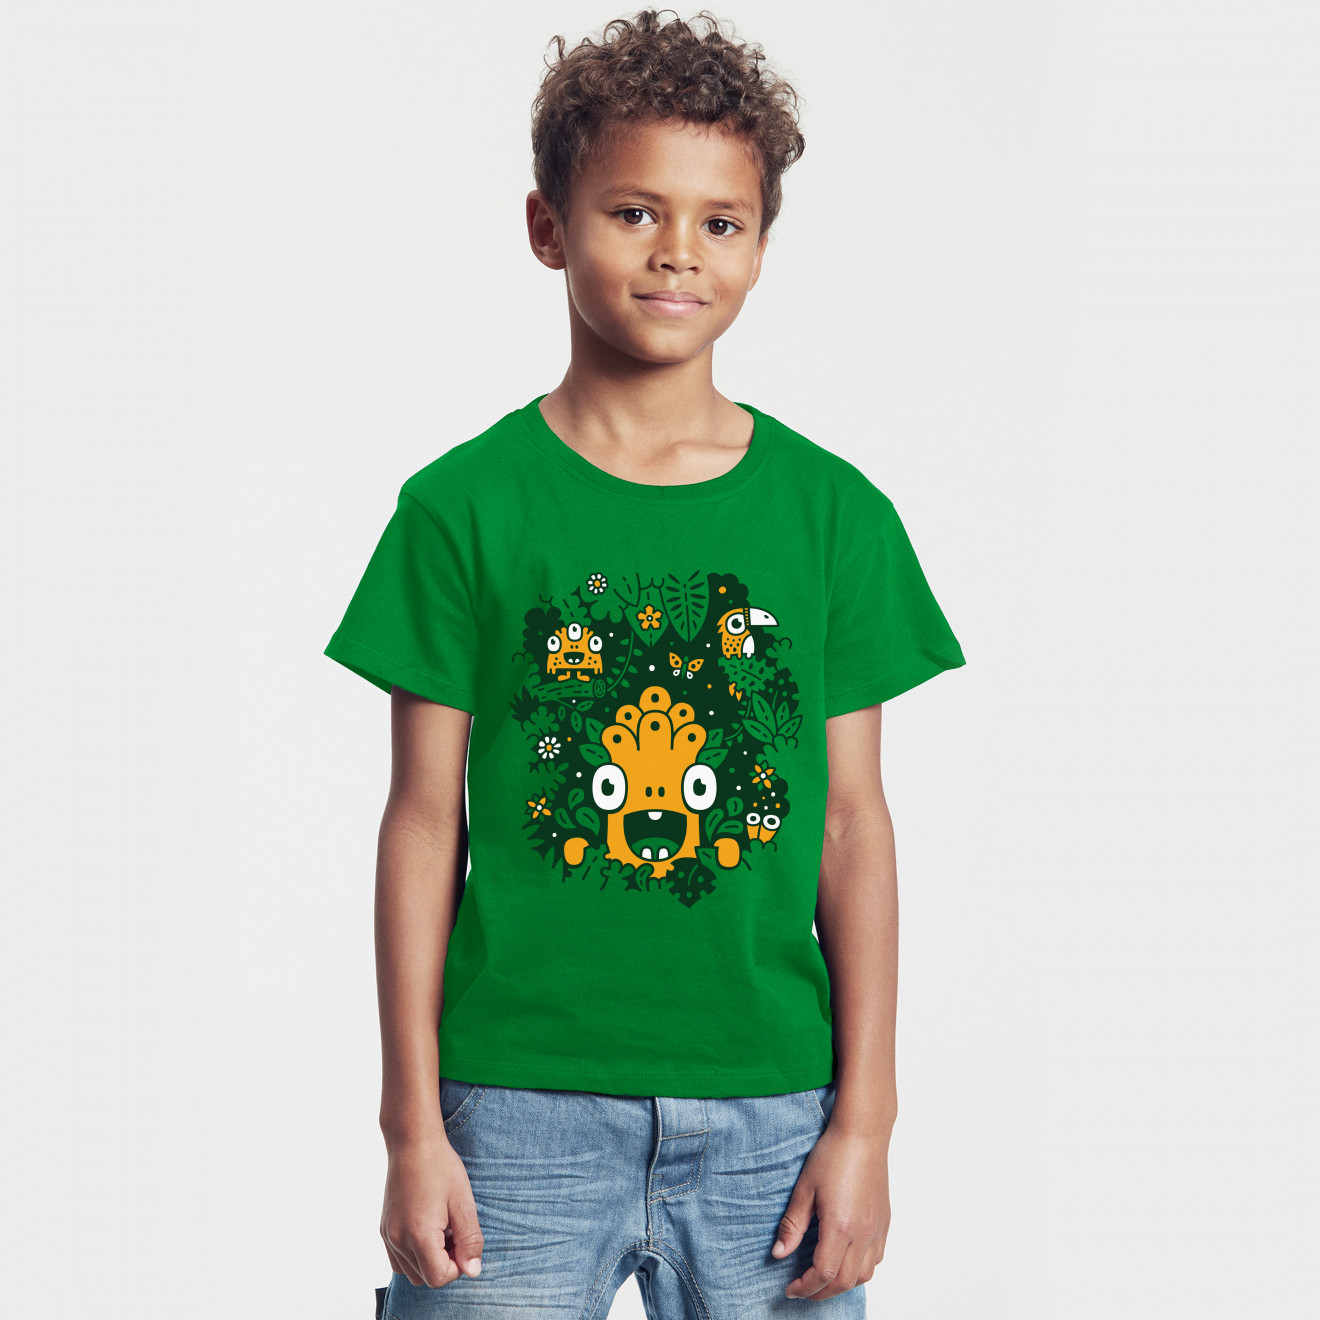 Image of the product Mighty jungle, from the product category T-shirts